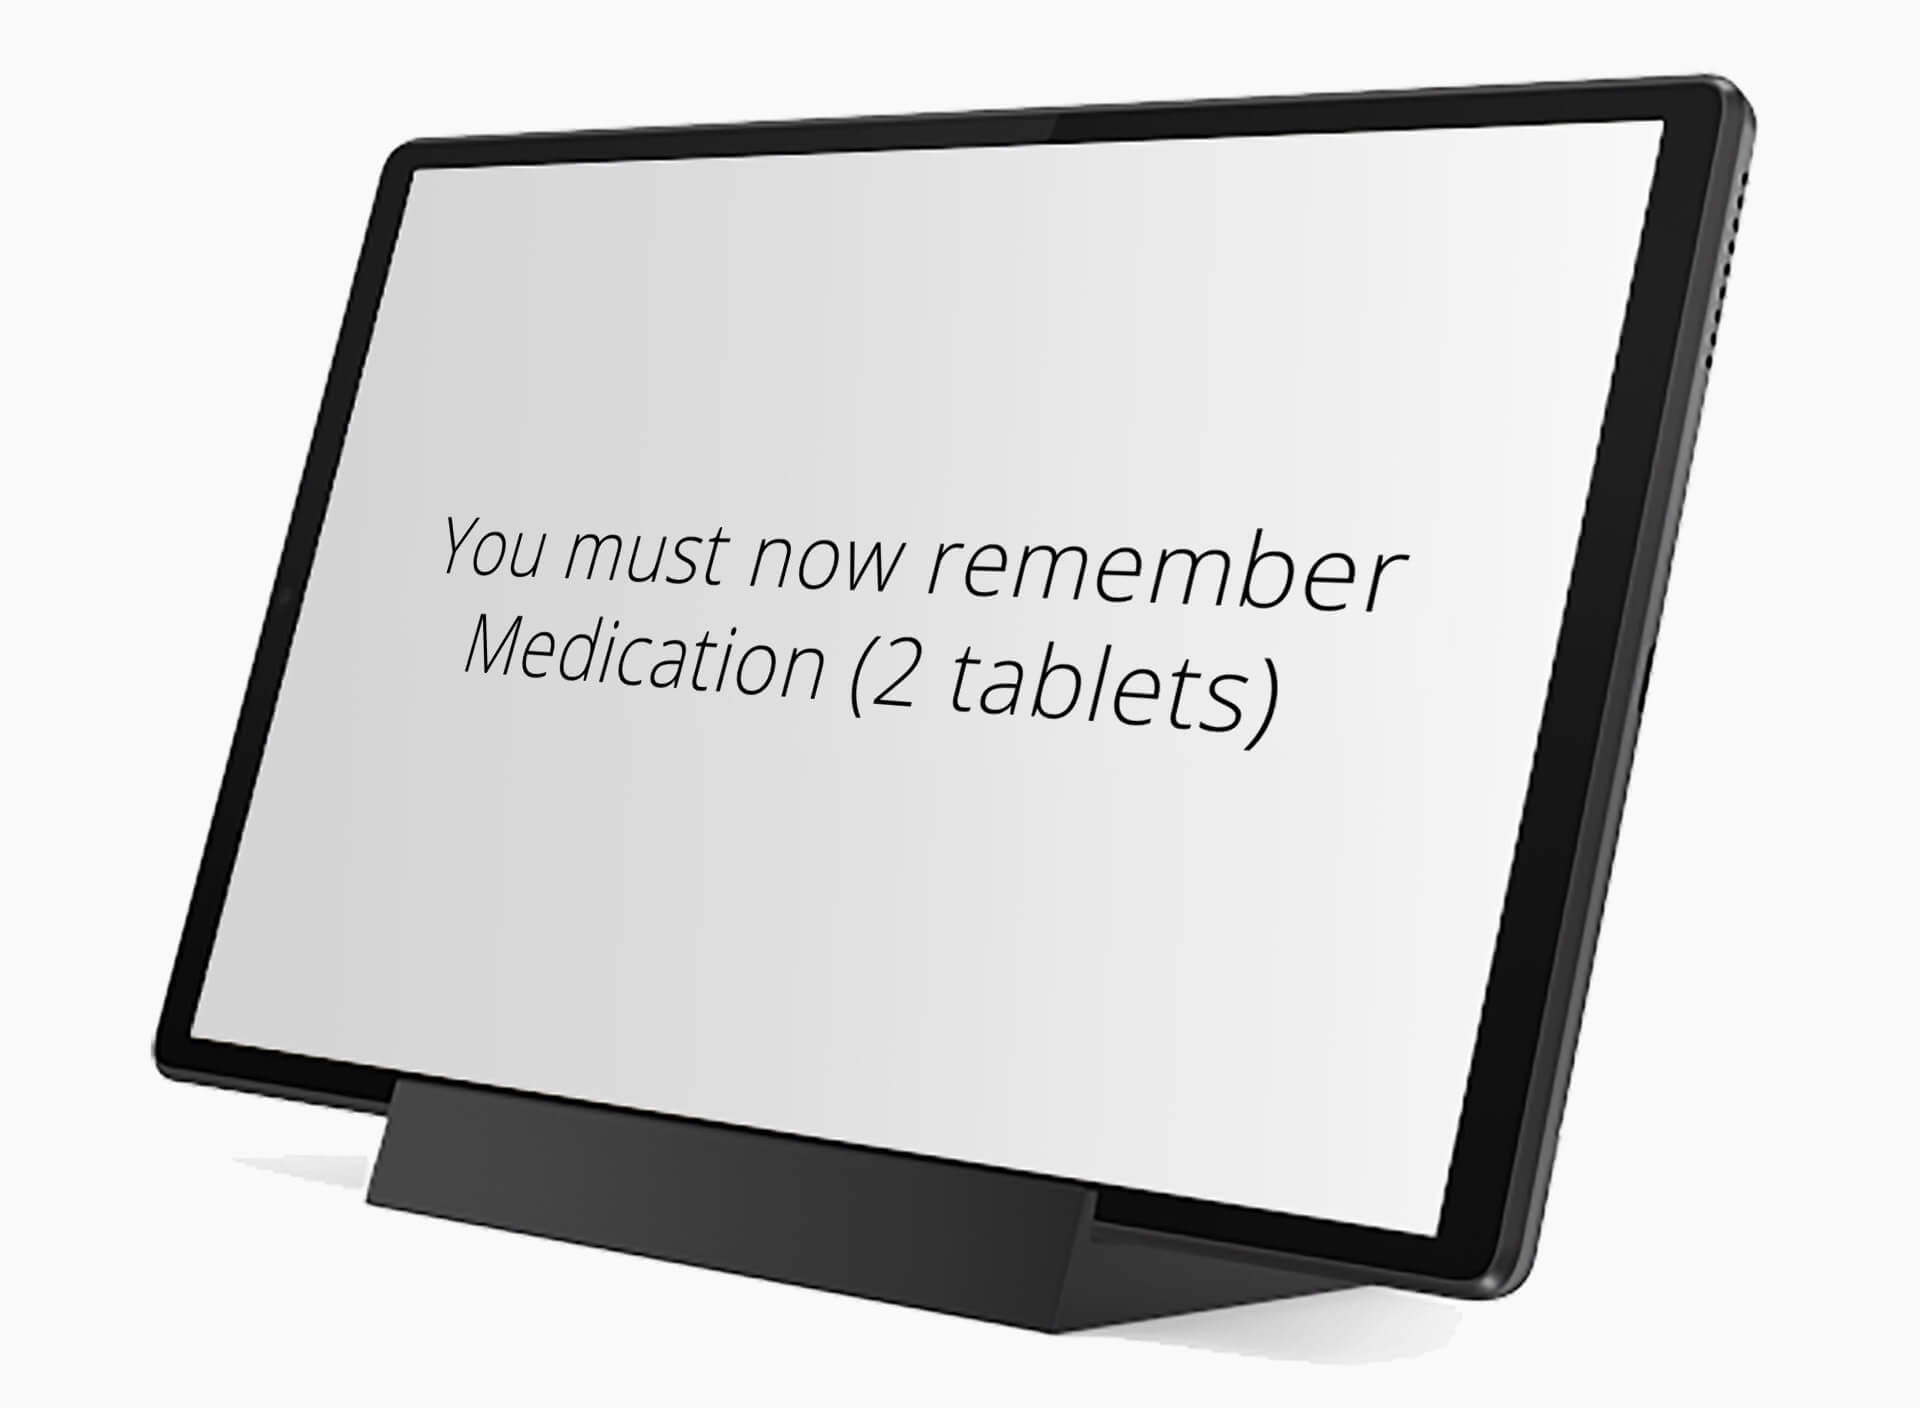 Klikkit tablet with a visual reminder written on the screen